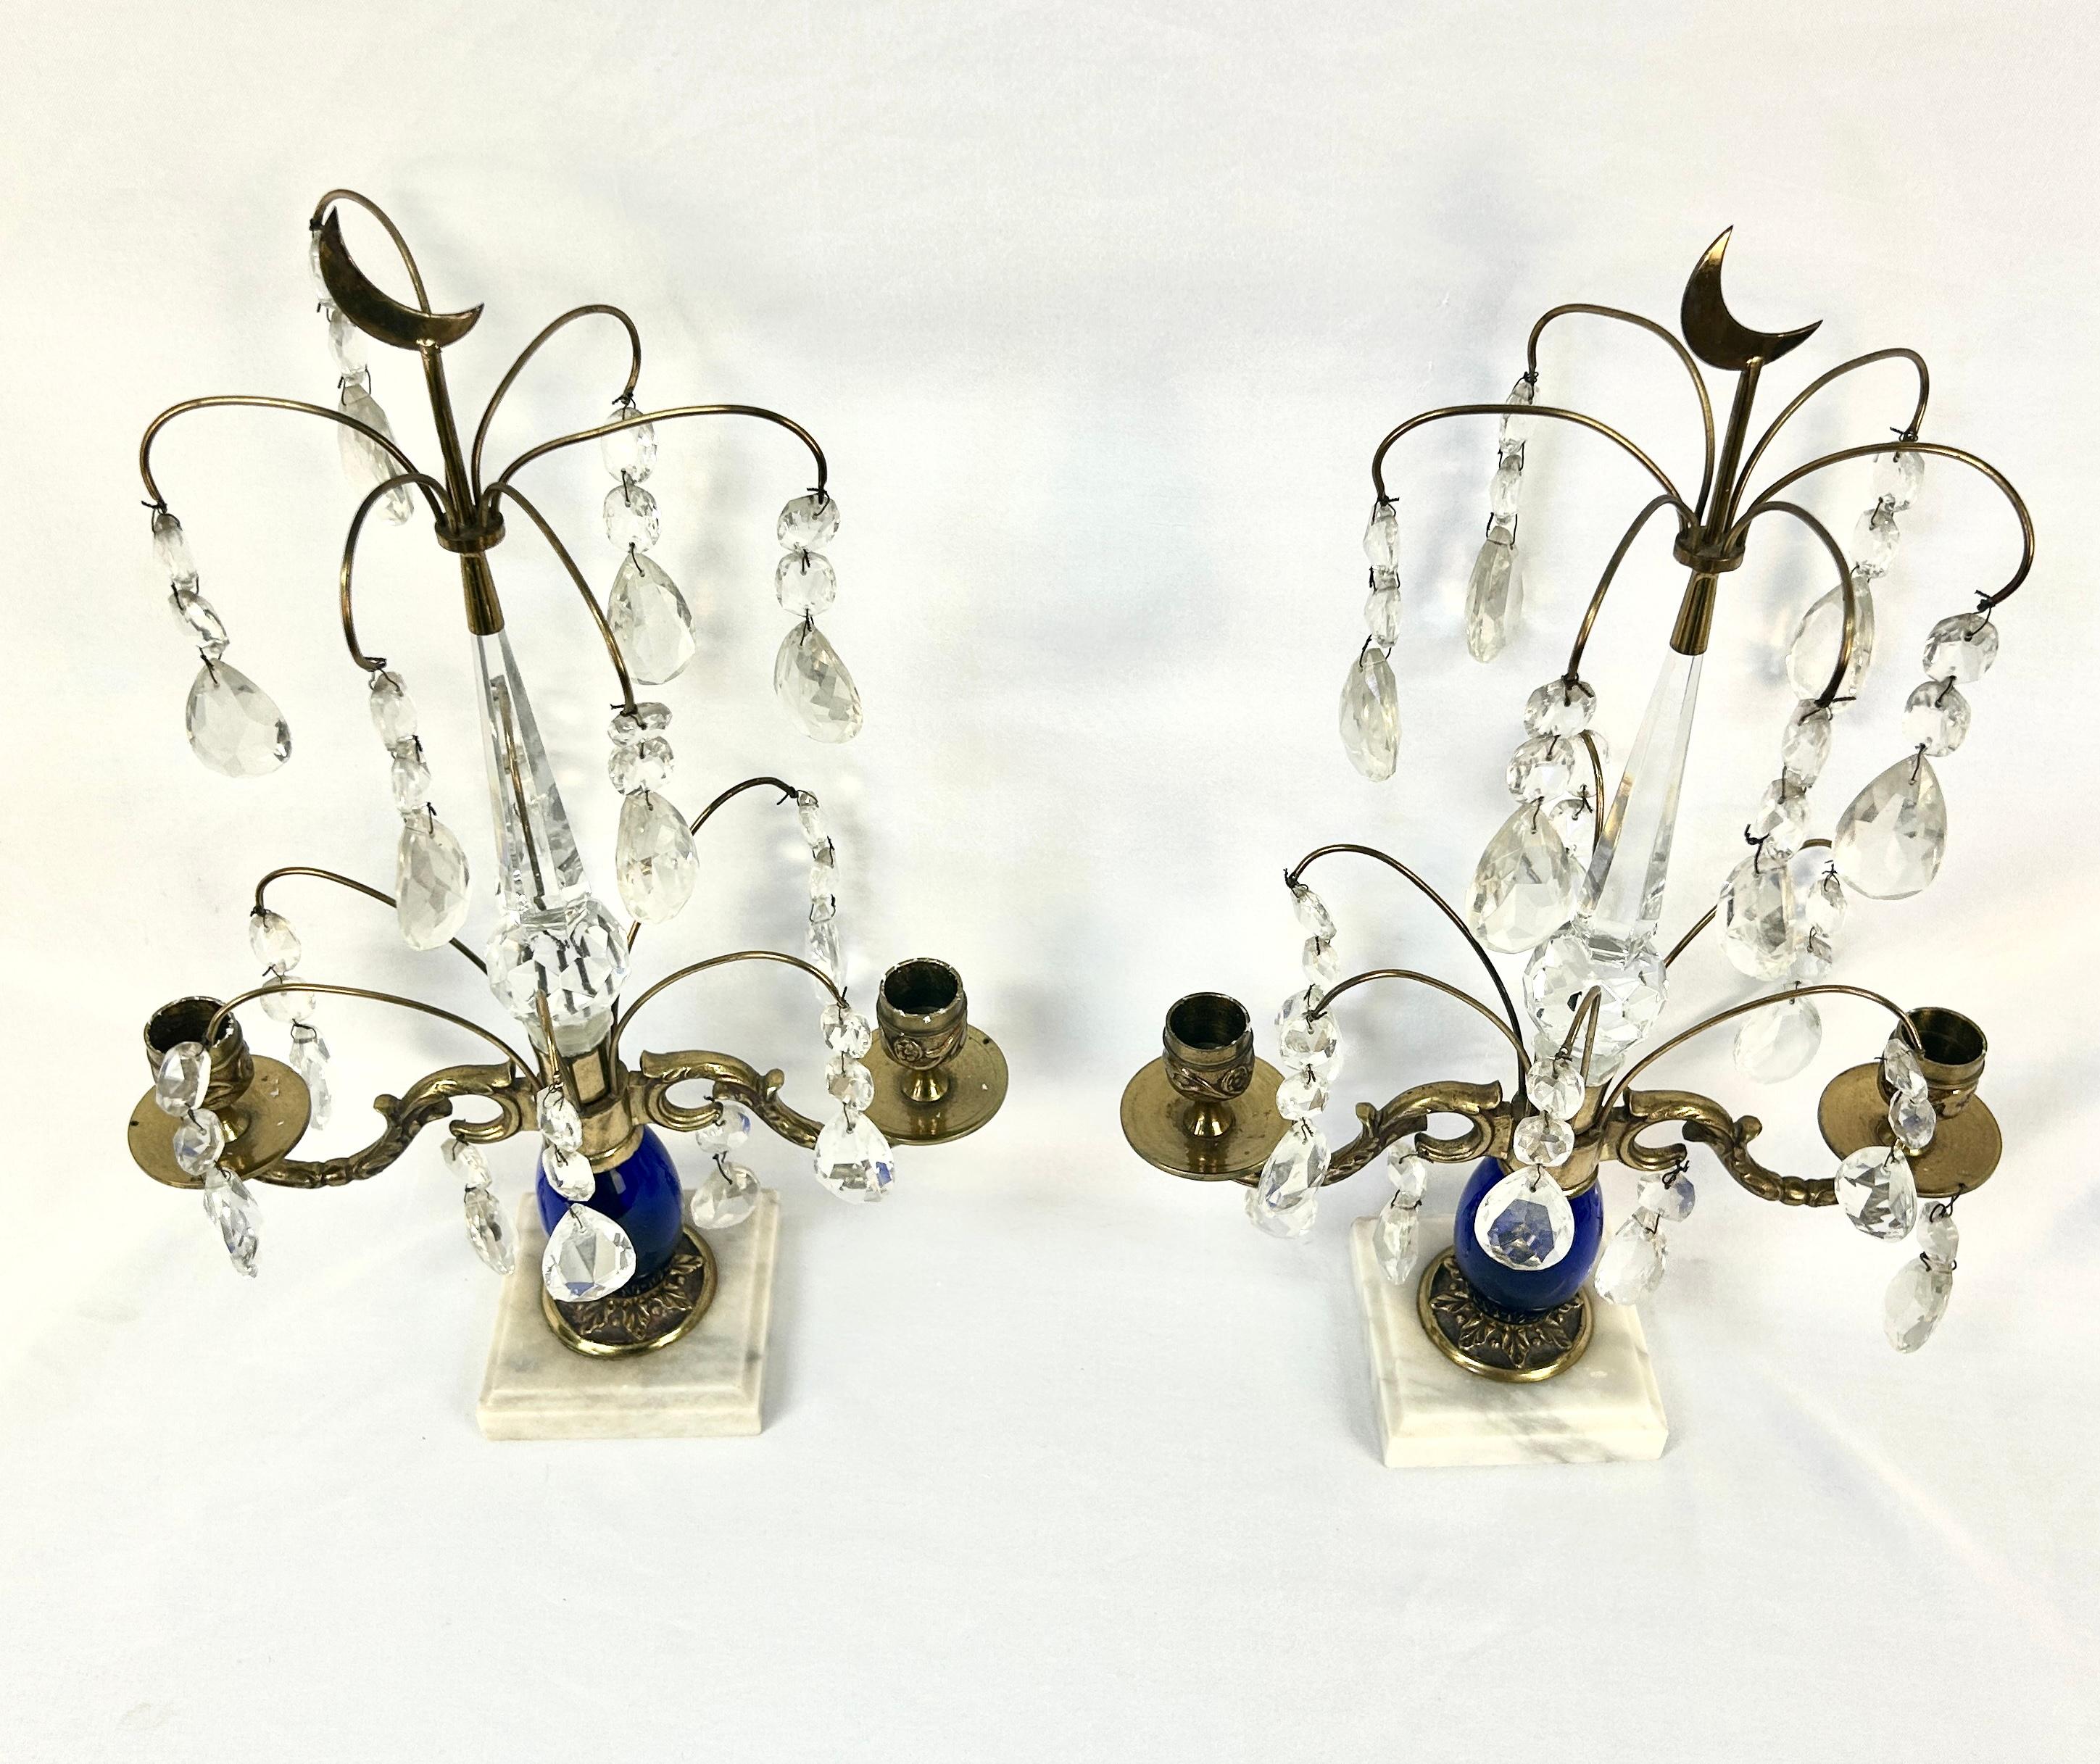 Pair of elegant Girandoles of Gustavian style, 19th century. Cobalt blue ovoid shafts resting on a white marble base. Each has two brass candleholders with delicate brass stems holding hanging antique crystals and topped by brass crescent moons.